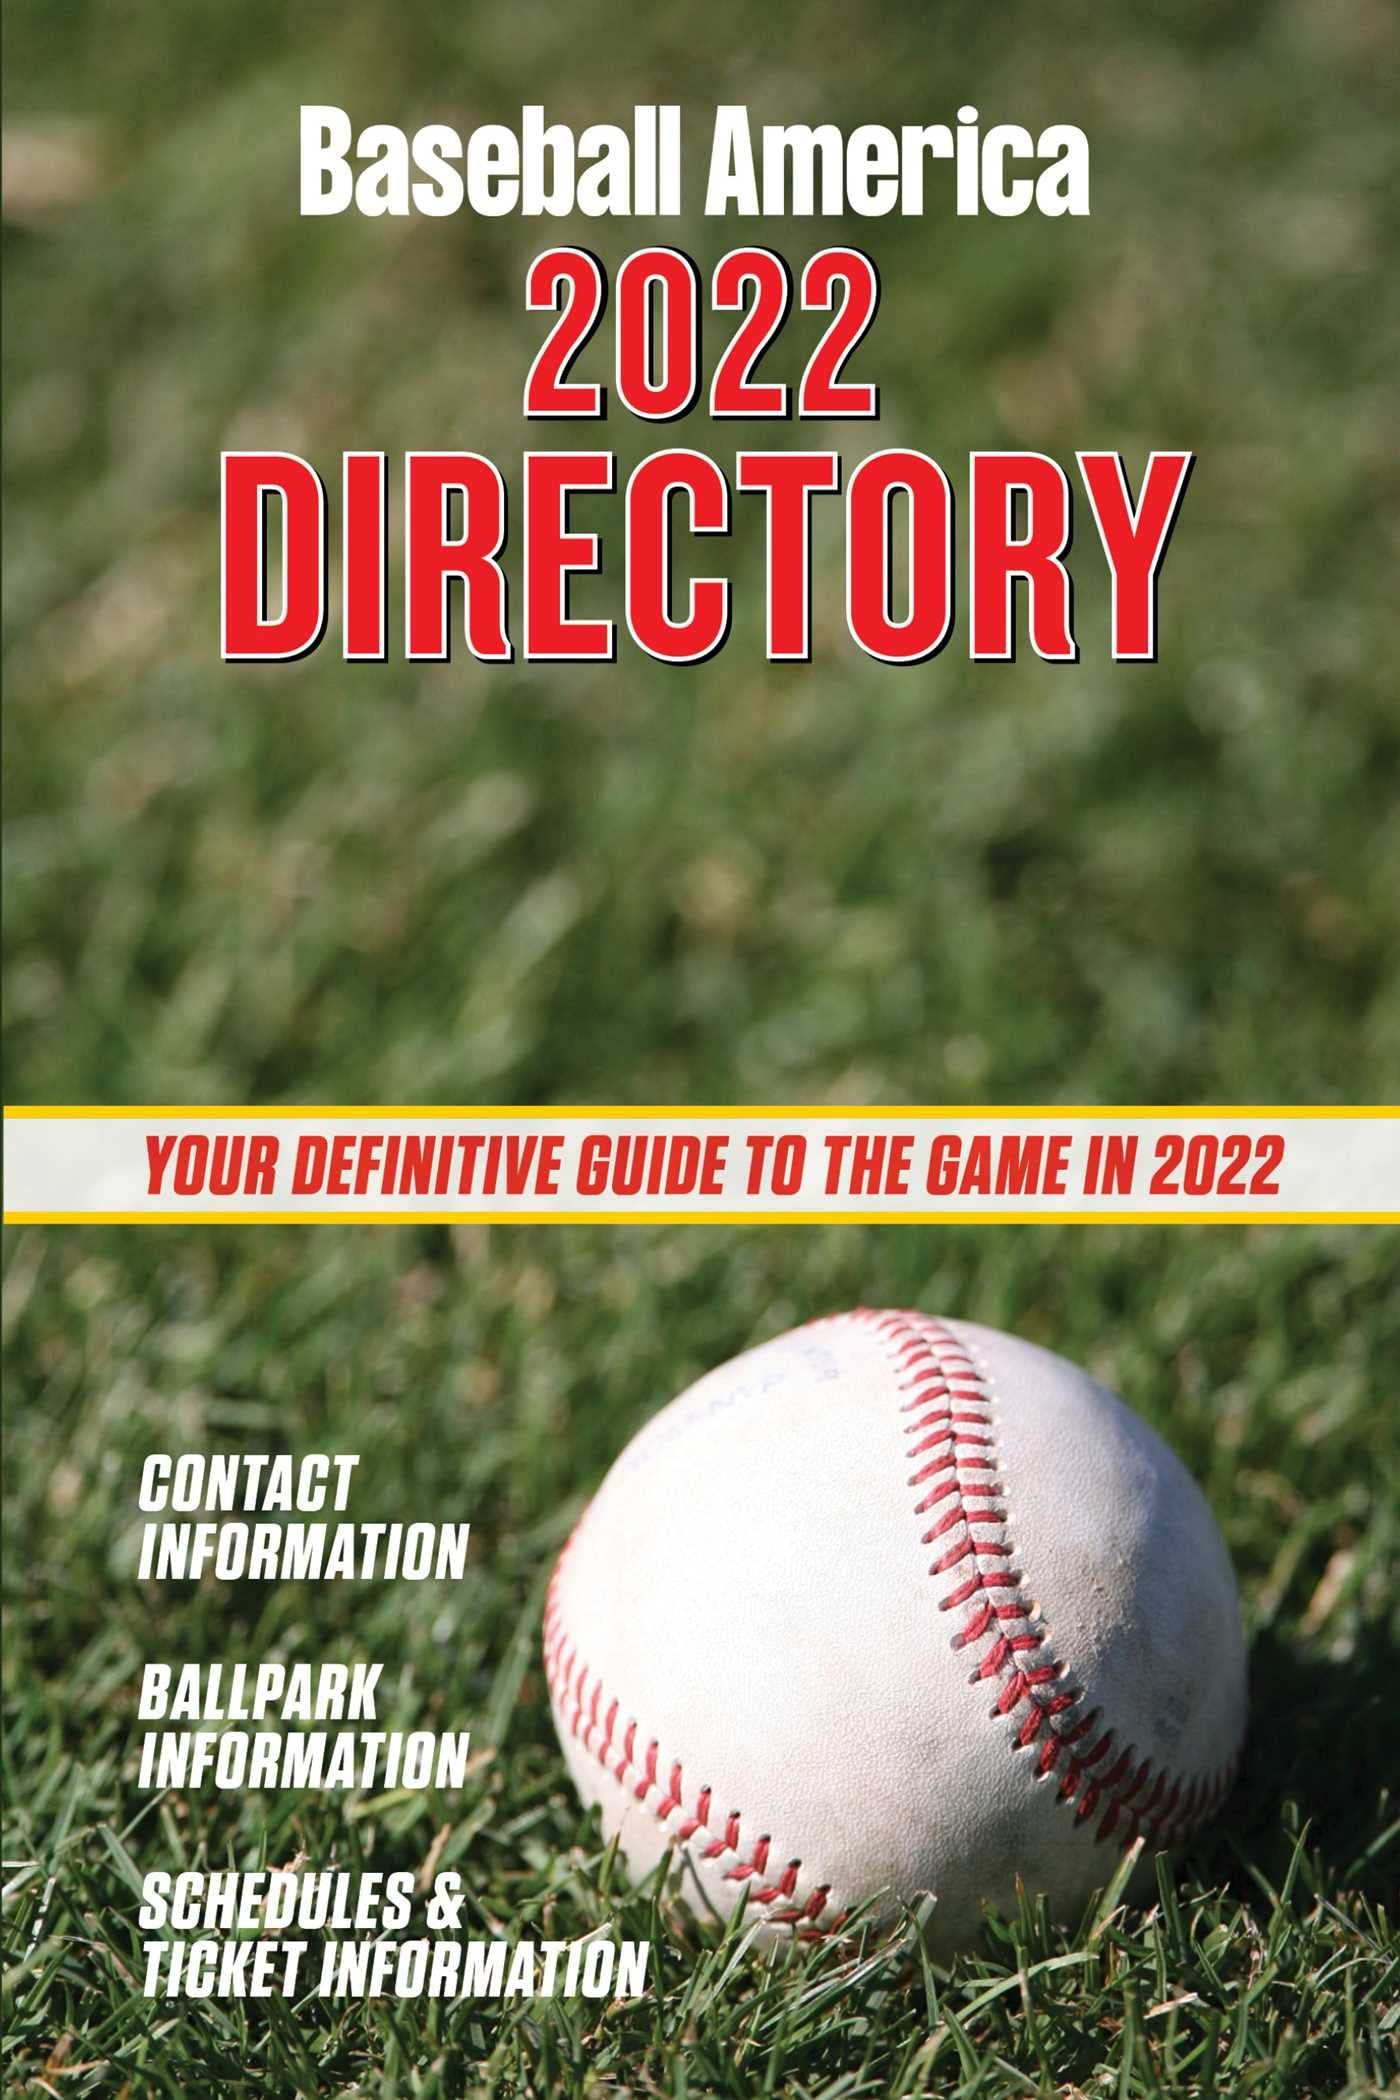 Baseball America 2022 Directory : Who's Who in Baseball, and Where to Find Them.